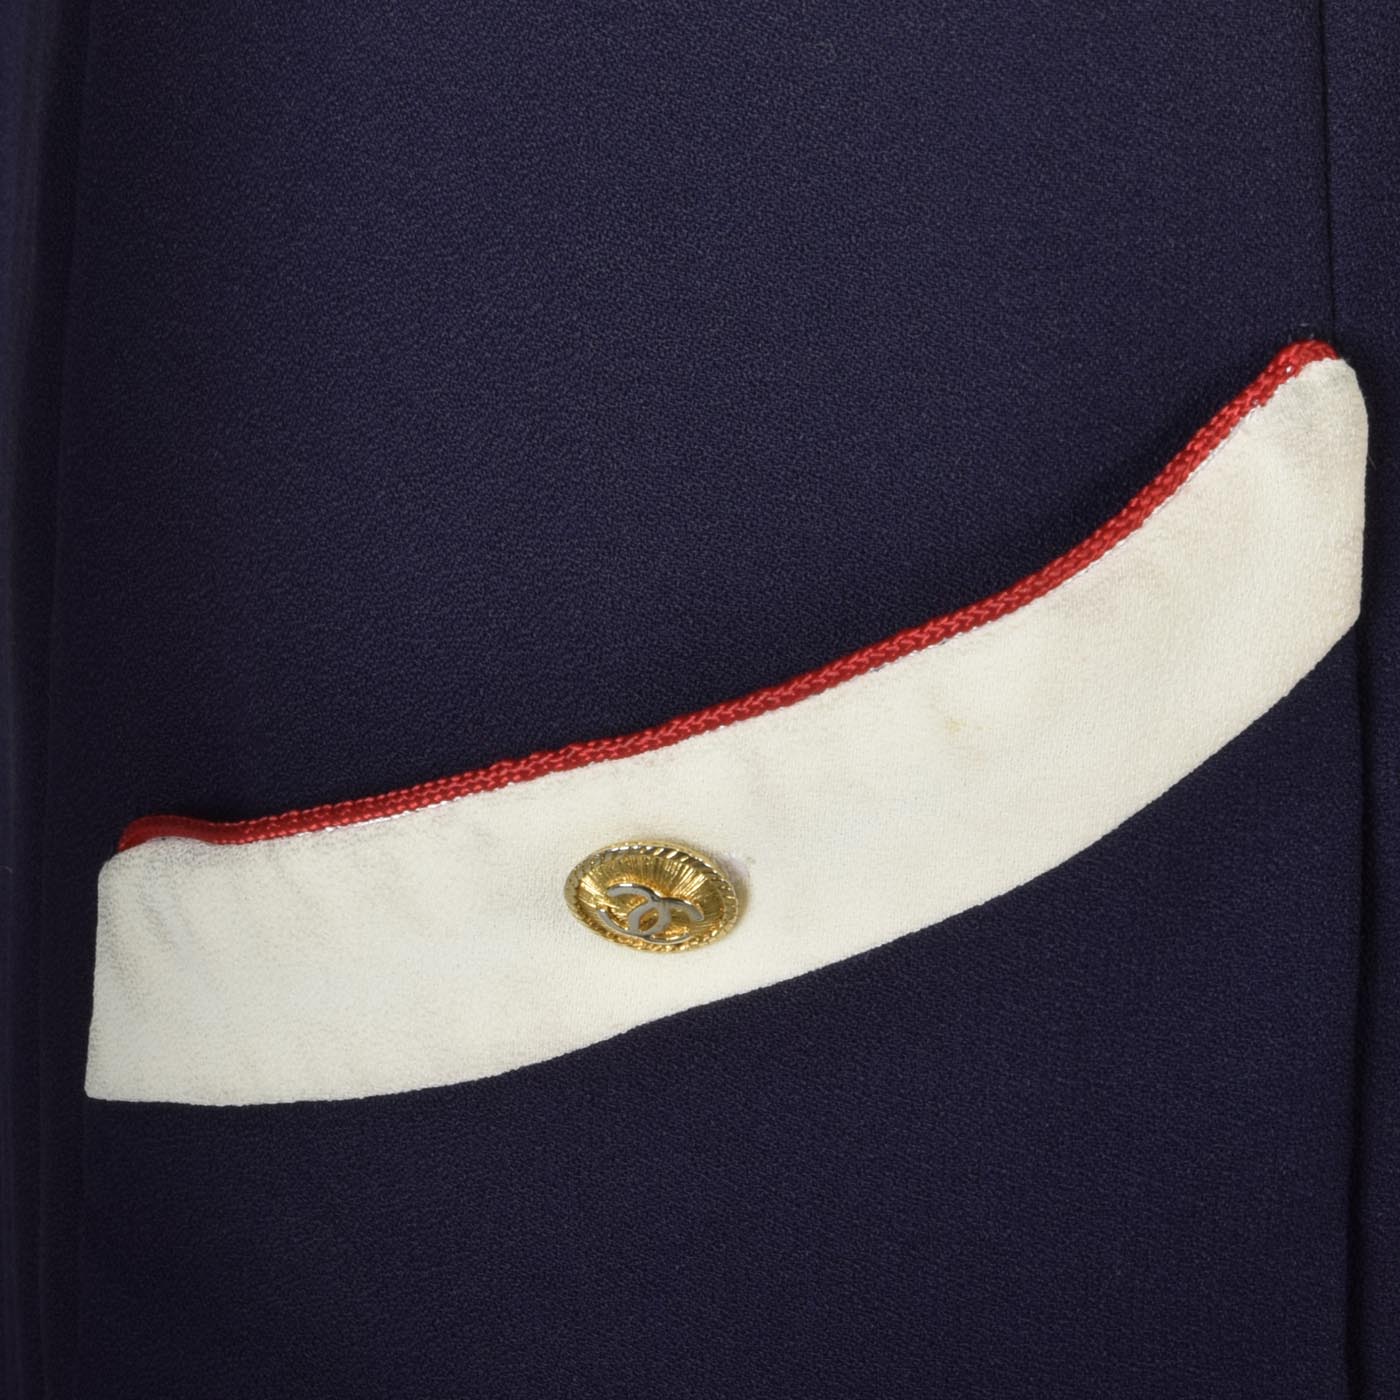 Chanel Nautical Shift Dress in Red White & Blue